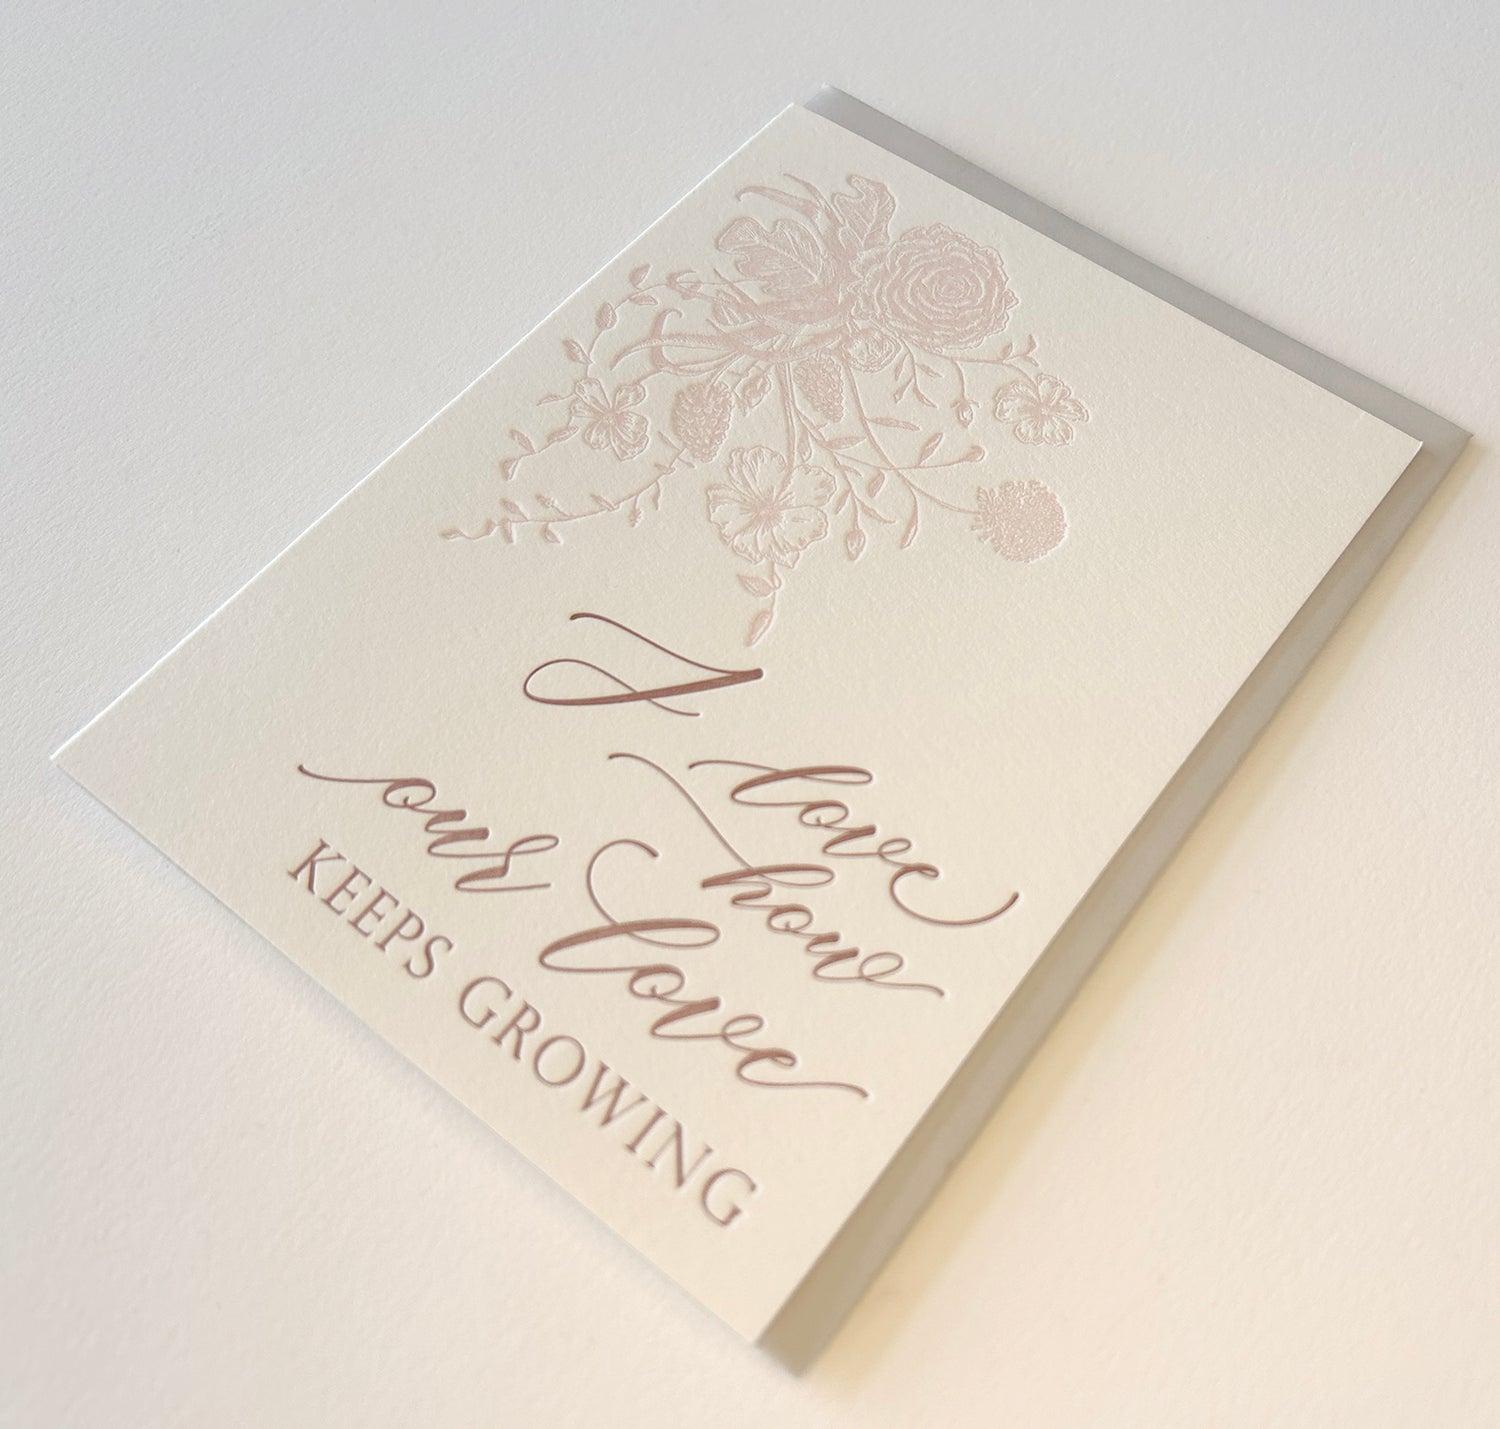 Letterpress love card with florals that says "I love how our love keeps growing" by Rust Belt Love